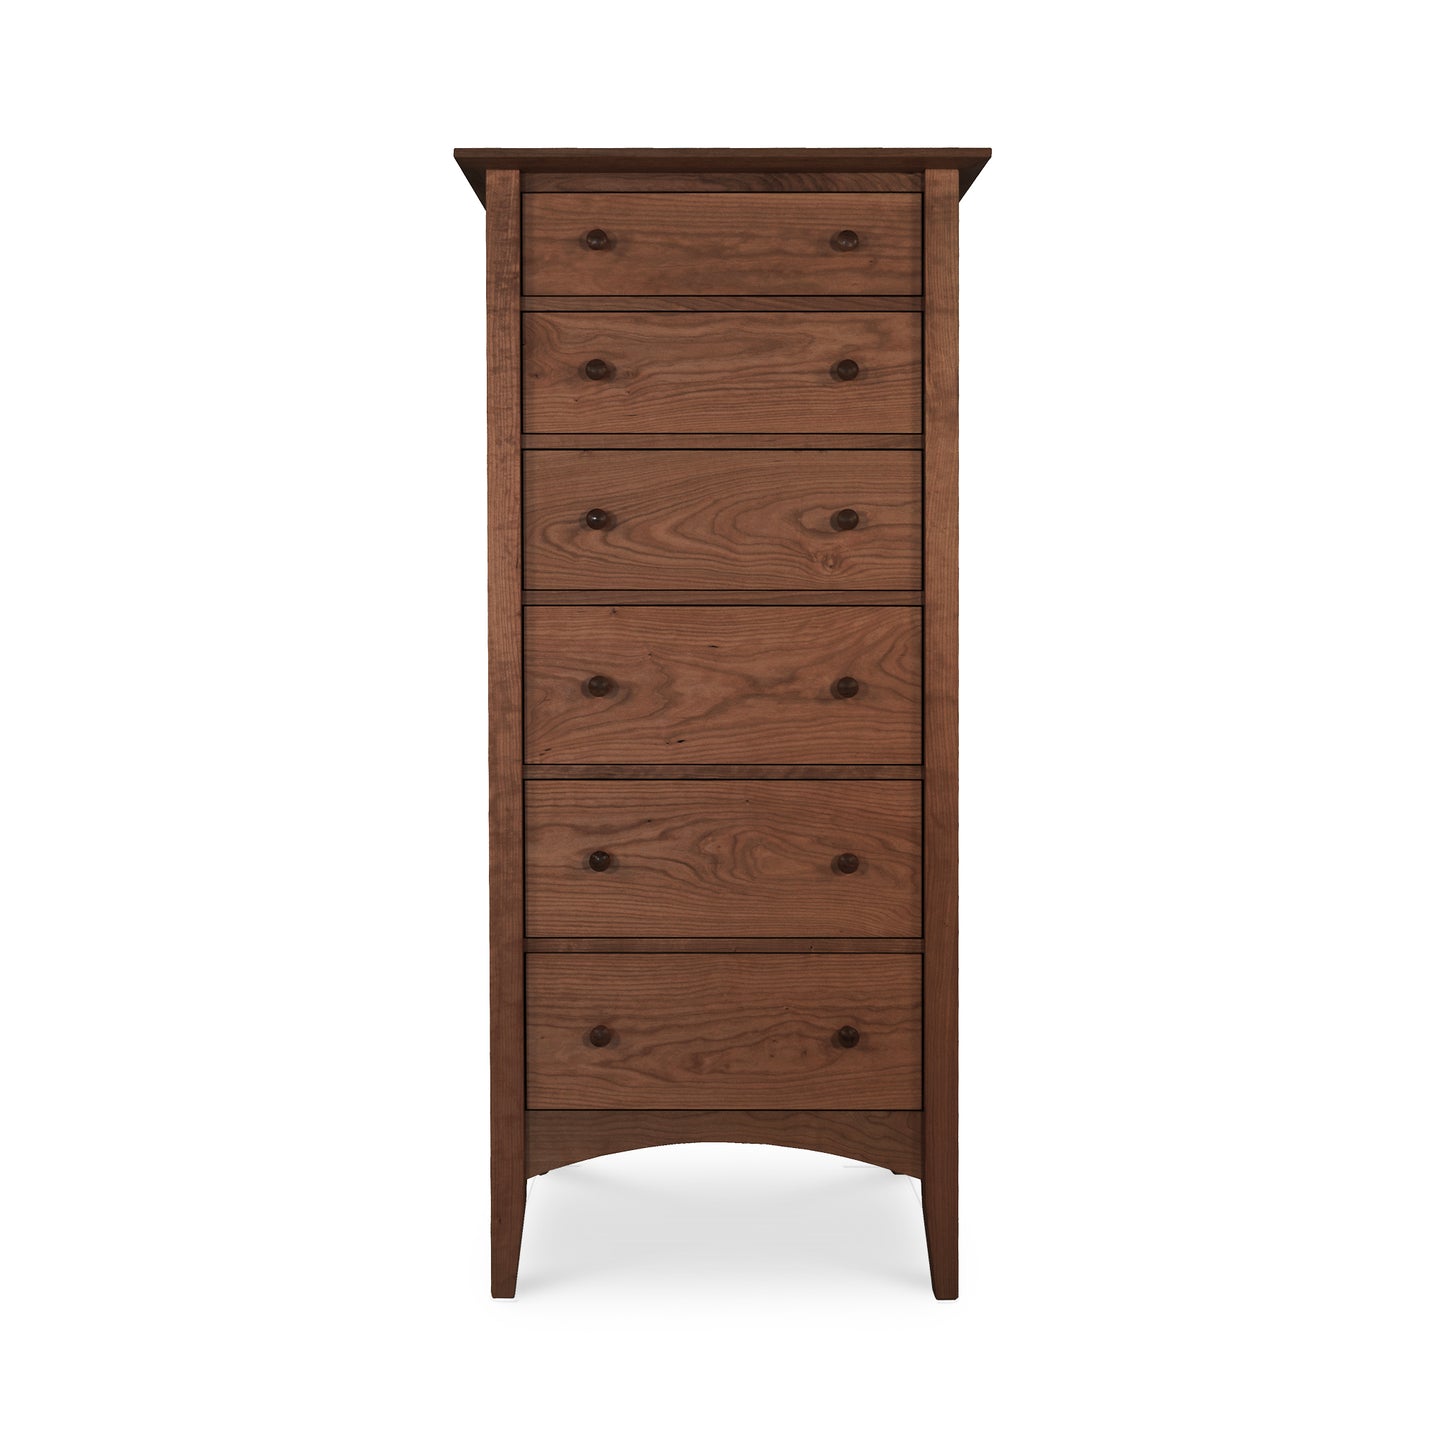 A sustainably harvested Maple Corner Woodworks Vermont Shaker 6-Drawer Lingerie Chest.